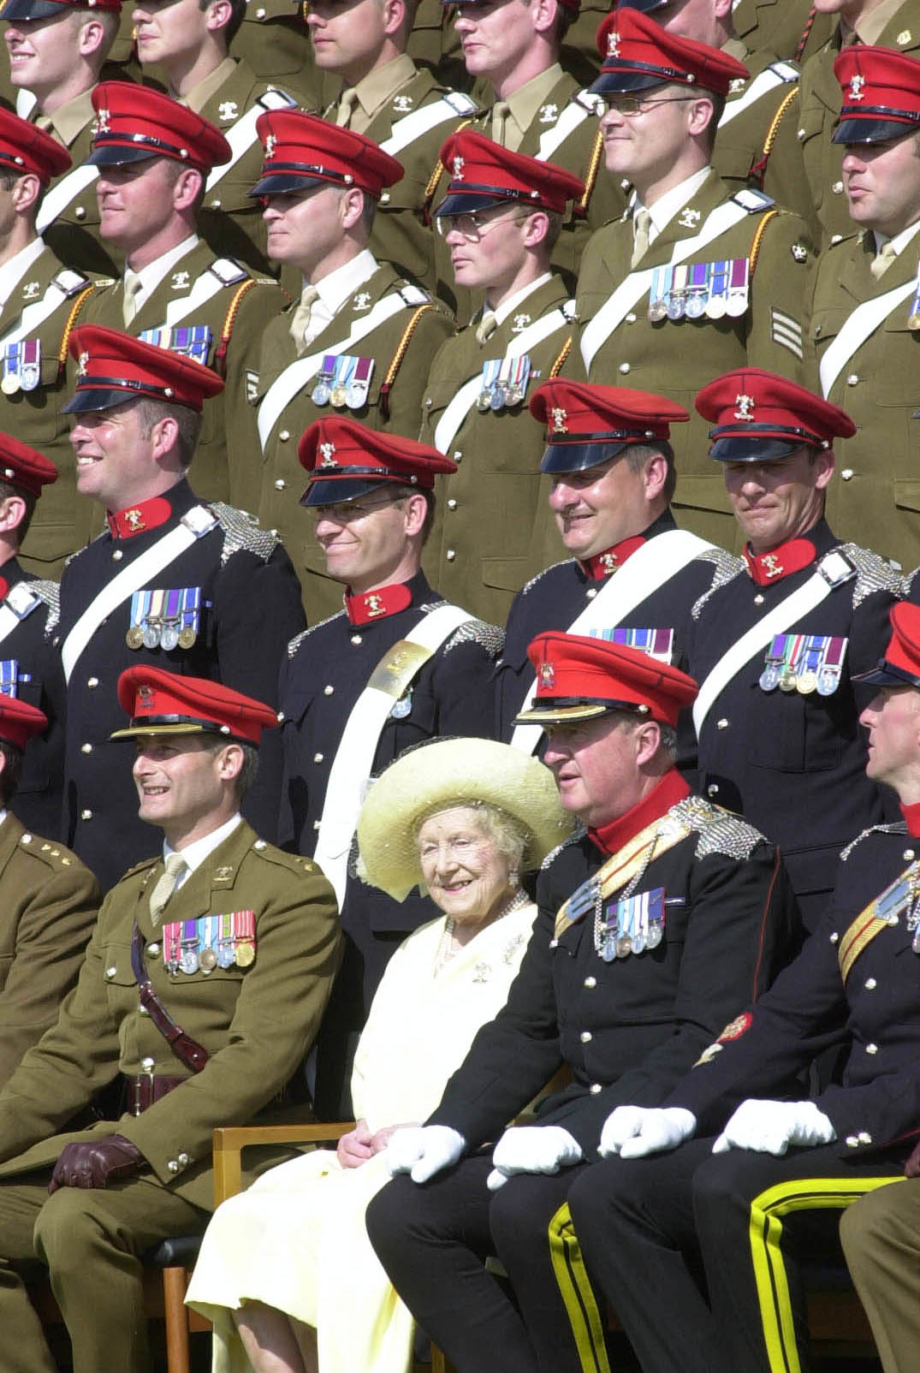 Queen Elizabeth The Queen Mother with the Royal Lancers